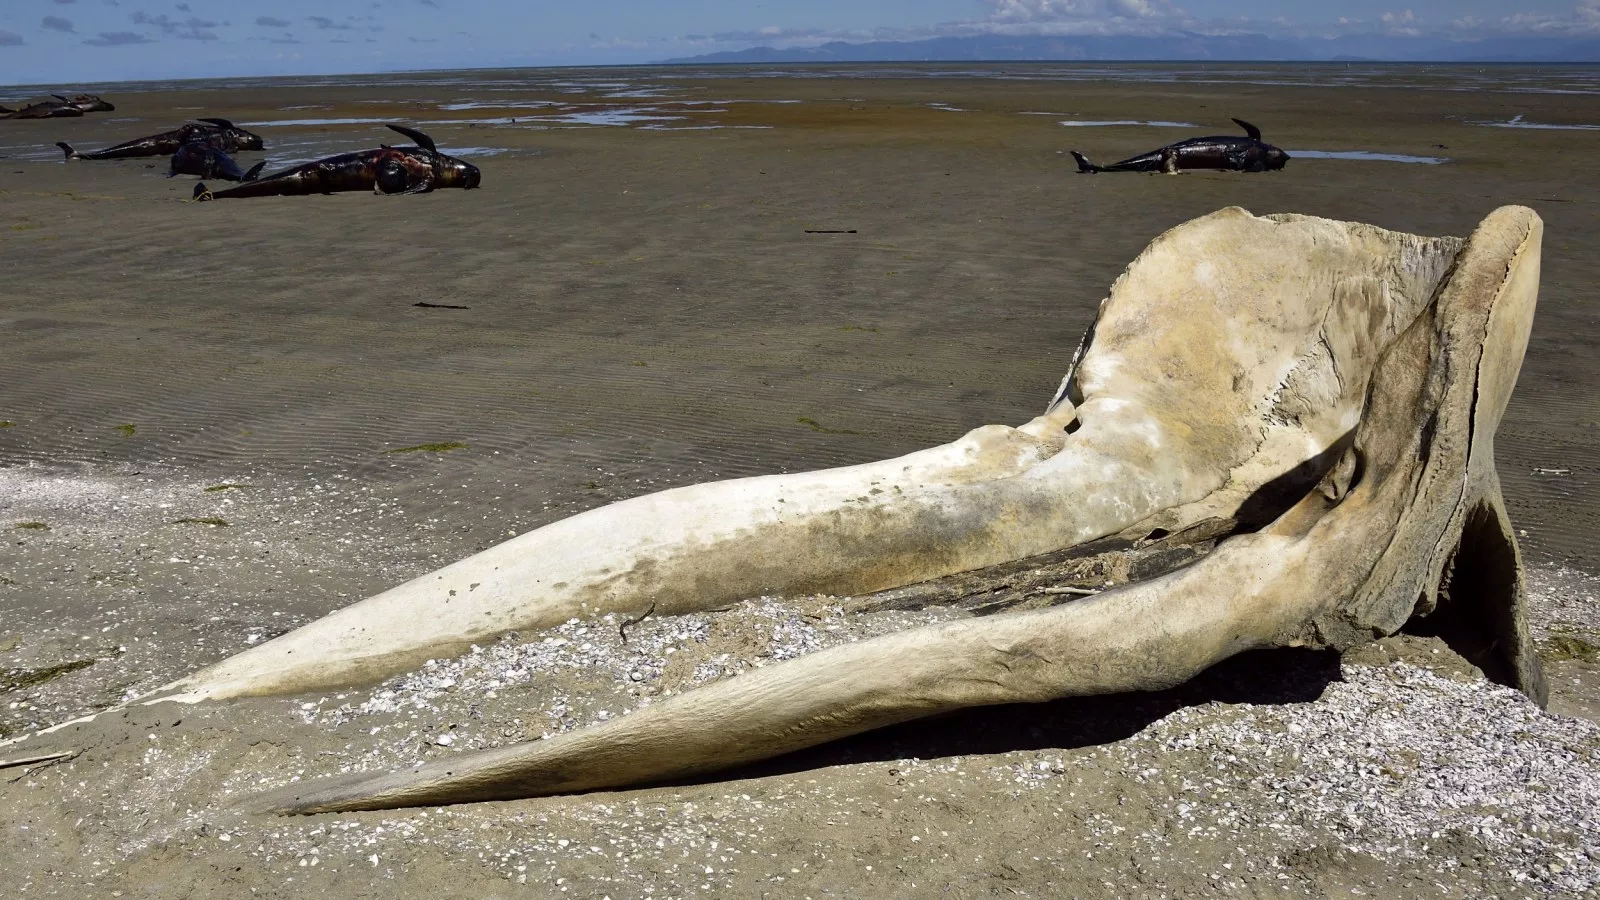 Whale bones found in highway were not from mystery whale